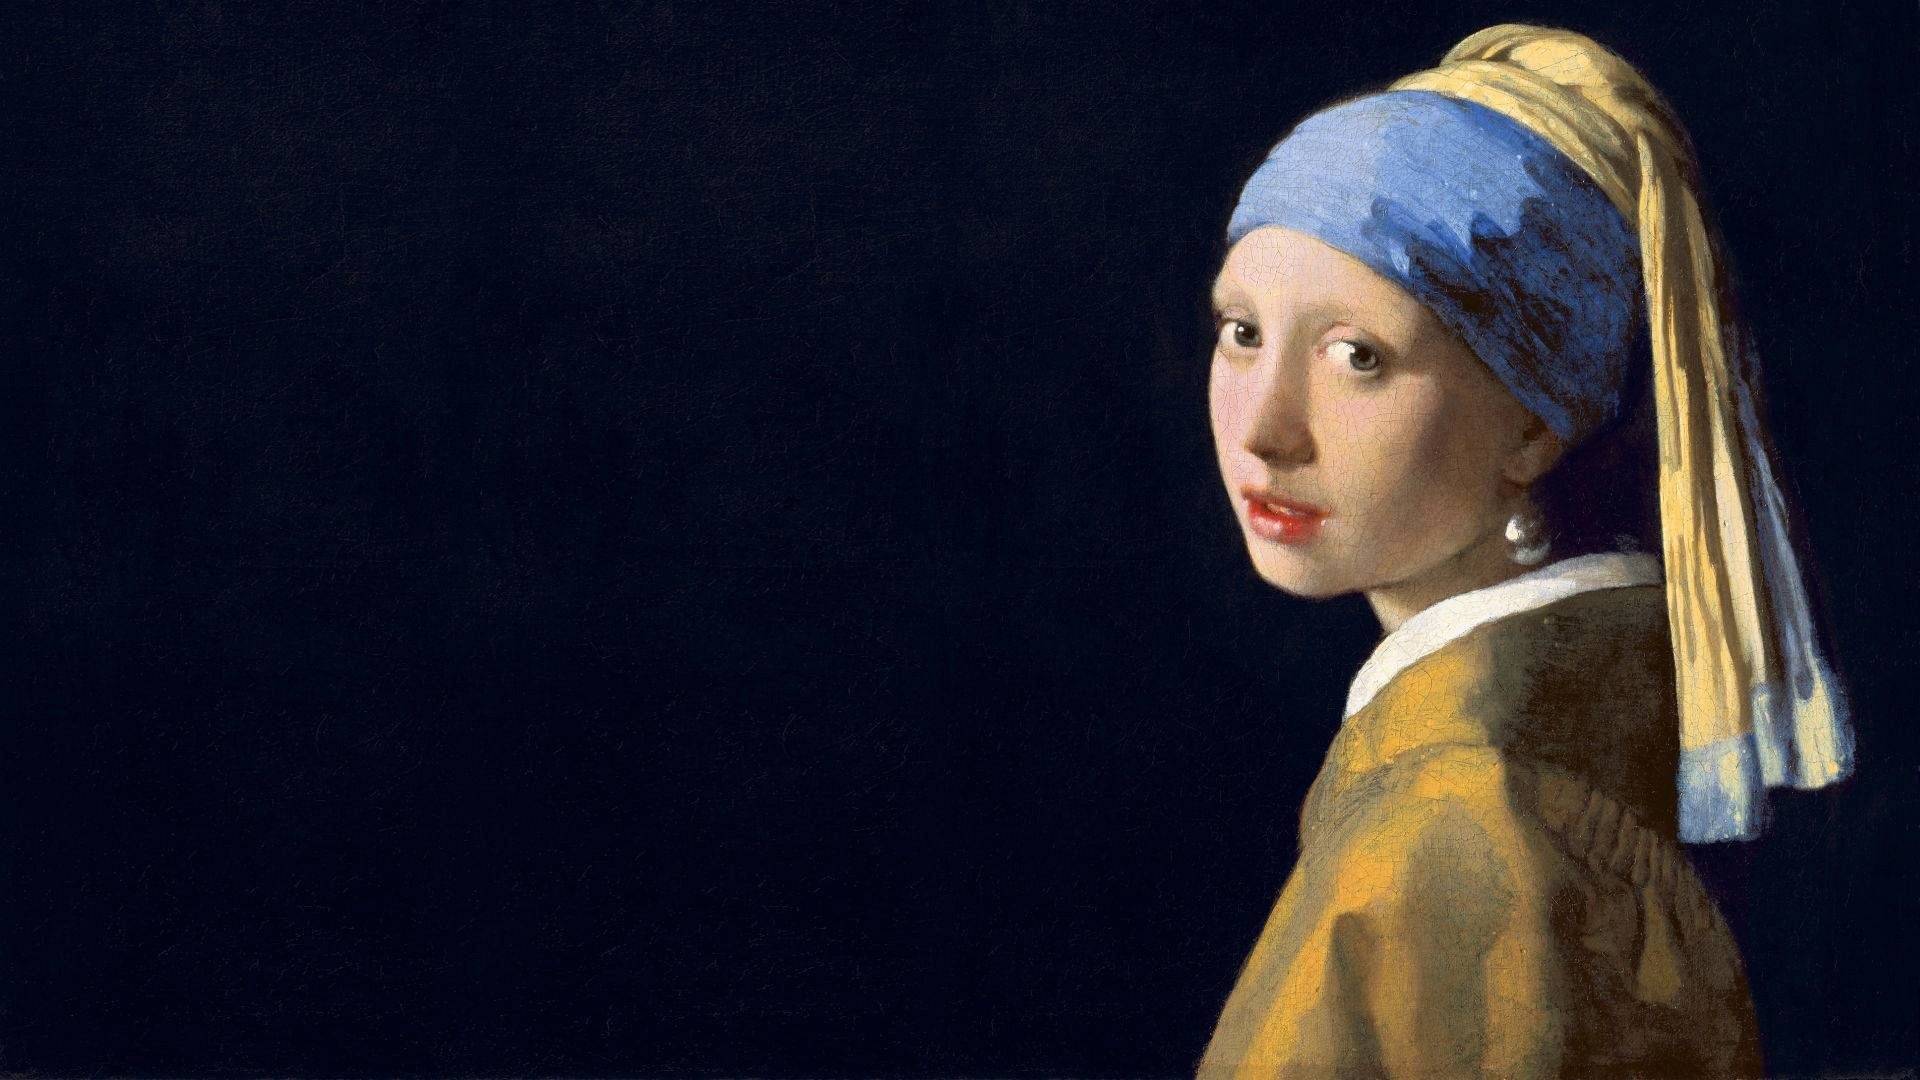 Girl with a Pearl Earring, Top sellers, Up to 50% off, 1920x1080 Full HD Desktop